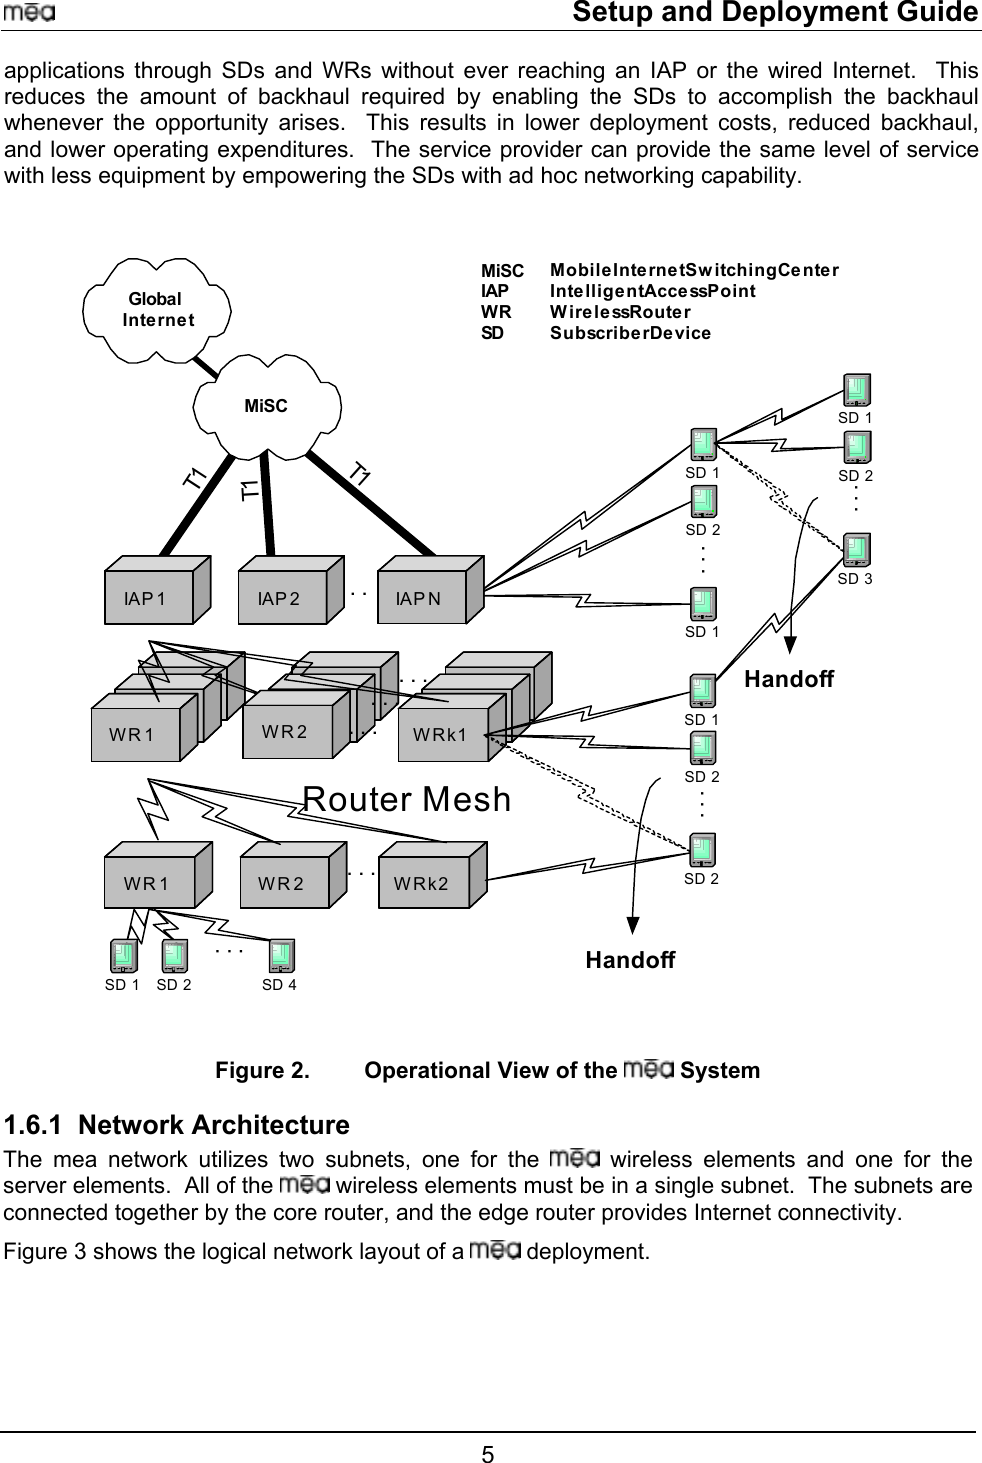     Setup and Deployment Guide applications through SDs and WRs without ever reaching an IAP or the wired Internet.  This reduces the amount of backhaul required by enabling the SDs to accomplish the backhaul whenever the opportunity arises.  This results in lower deployment costs, reduced backhaul, and lower operating expenditures.  The service provider can provide the same level of service with less equipment by empowering the SDs with ad hoc networking capability.   WR 1WR 2WR k2WR k1WR 1. . .. . .T1T1. . .T1. . .SD 2SD 1SD 1. . .SD 2SD 1SD 2. . .SD 2SD 1SD 3. . .. . .SD 2SD 1SD 4. . .MiSCIAPWRSDHandoffHandoffRouter MeshMobile Internet Switching CenterIntelligent Access PointW ire le ss RouterSubscriber DeviceMiSCGlobalInternetIA P  1IA P  2IA P  NWR 2 Figure 2.  Operational View of the   System 1.6.1 Network Architecture The mea network utilizes two subnets, one for the   wireless elements and one for the server elements.  All of the   wireless elements must be in a single subnet.  The subnets are connected together by the core router, and the edge router provides Internet connectivity. Figure 3 shows the logical network layout of a   deployment.   5 